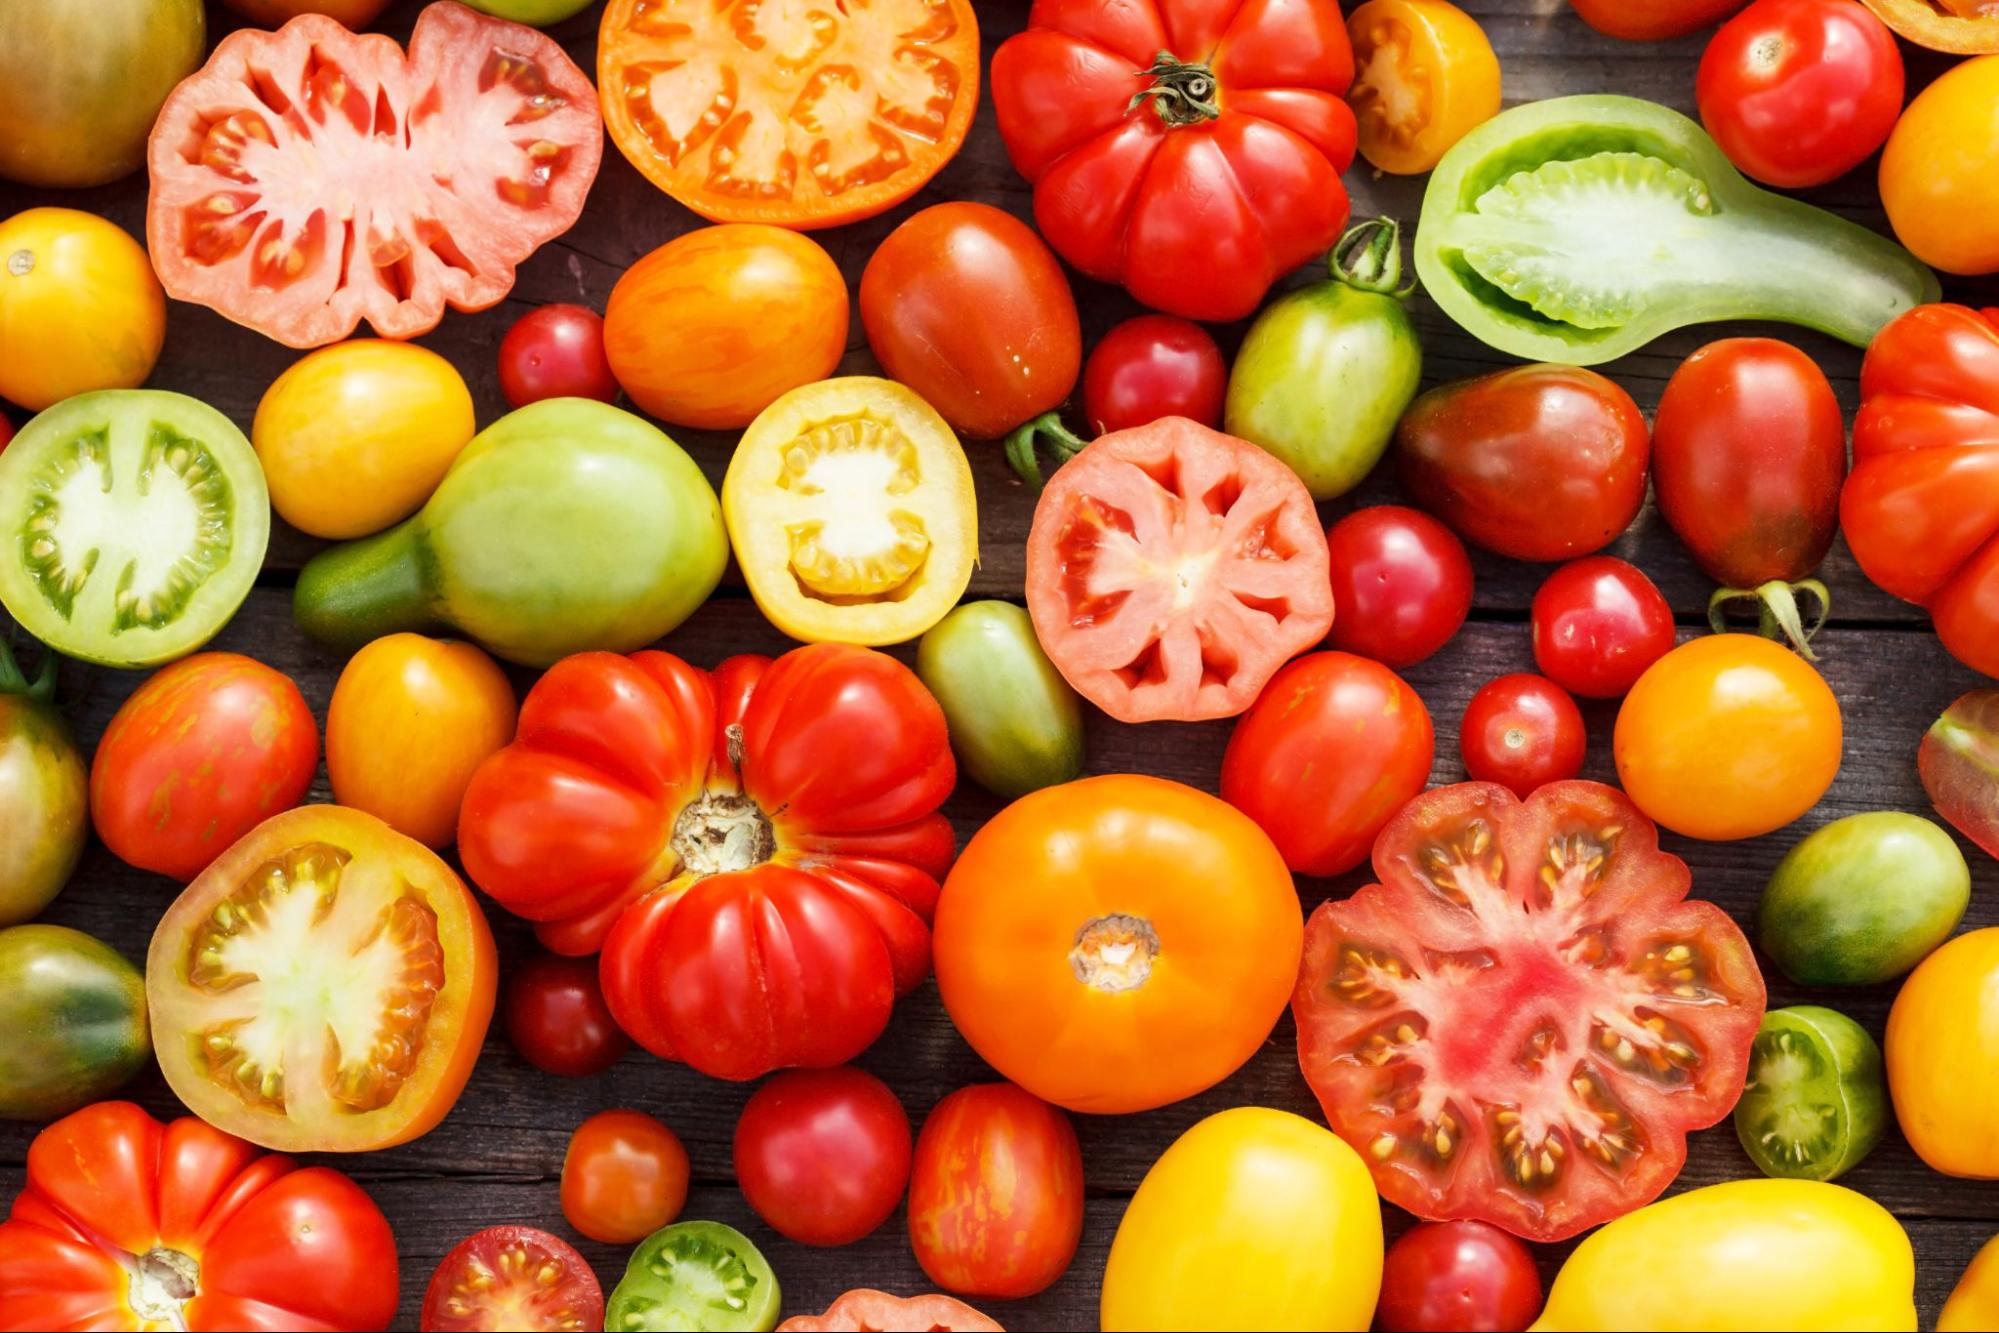 Heirloom tomatoes in all shapes and colors.